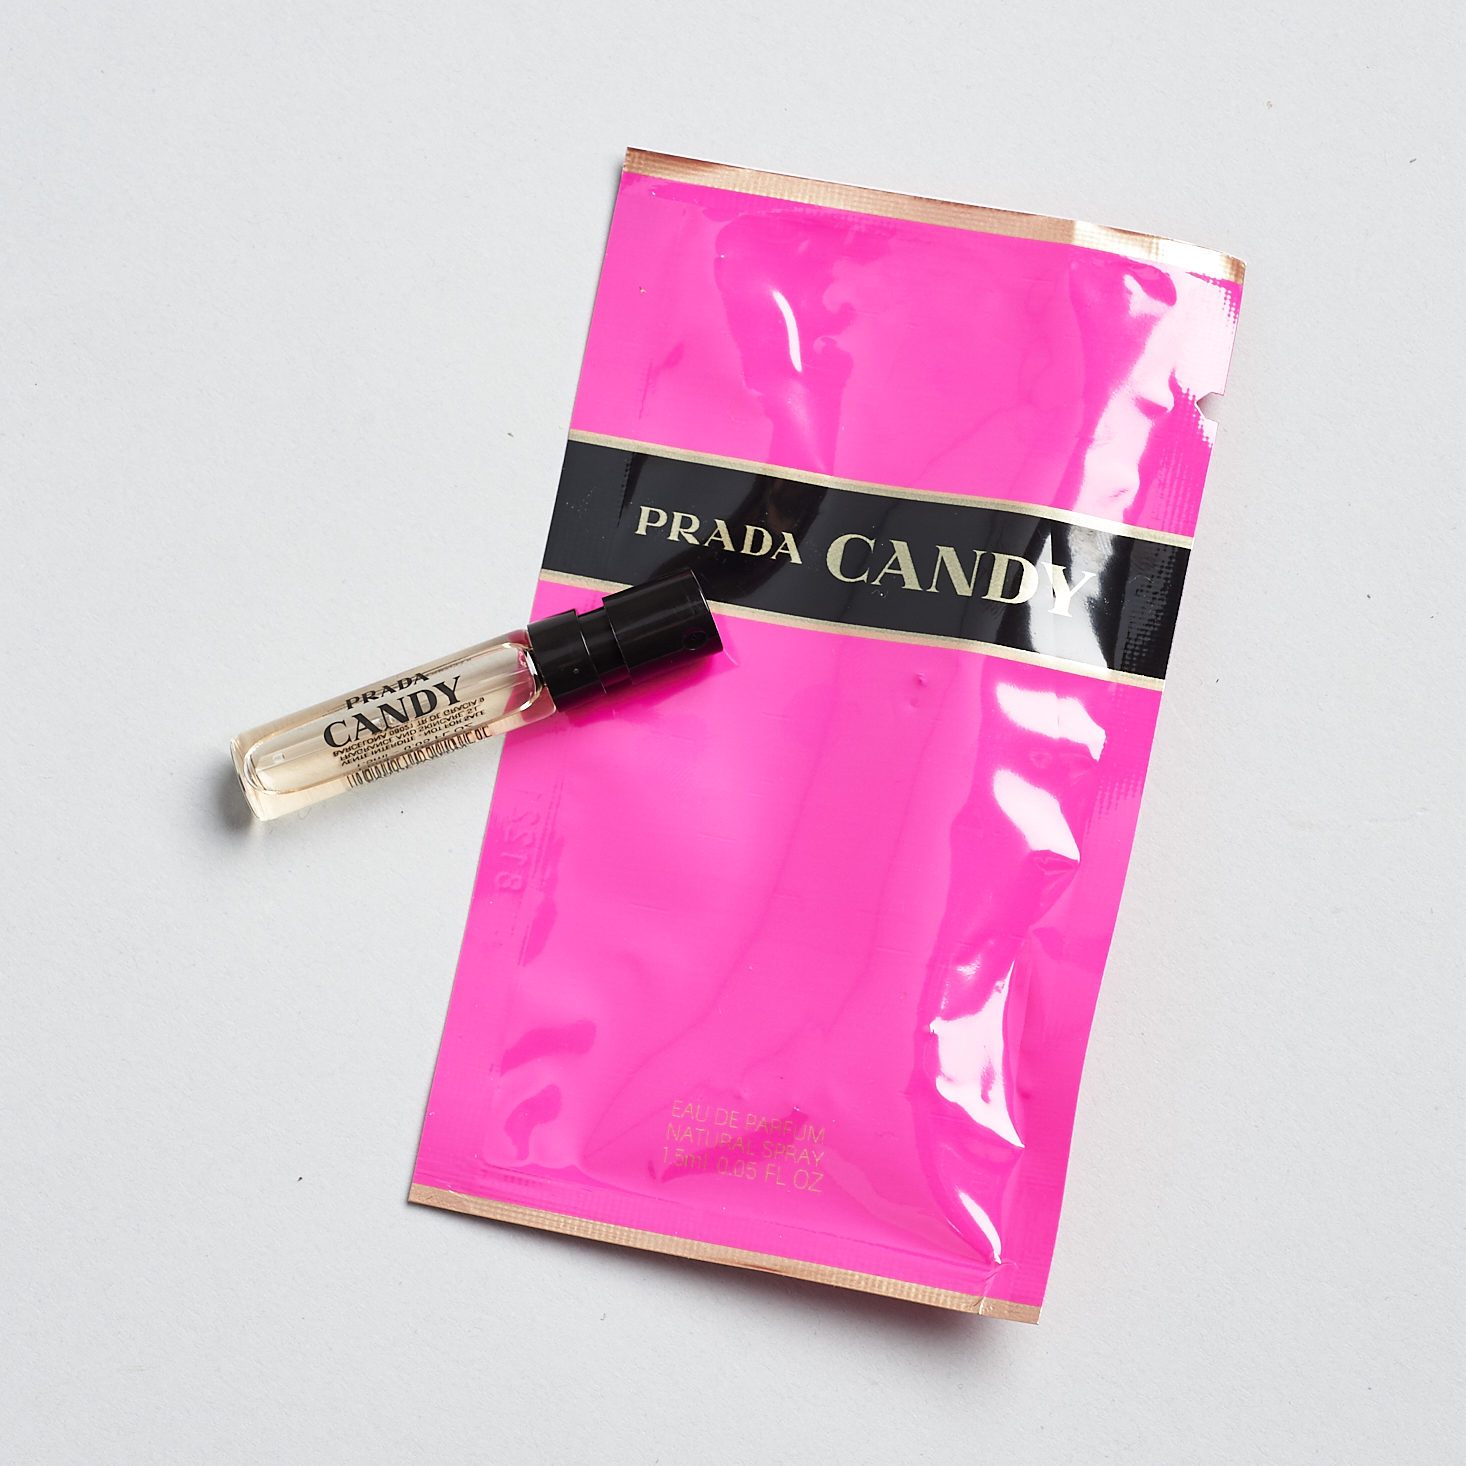 hot pink prada candy packaging with small perfume vial